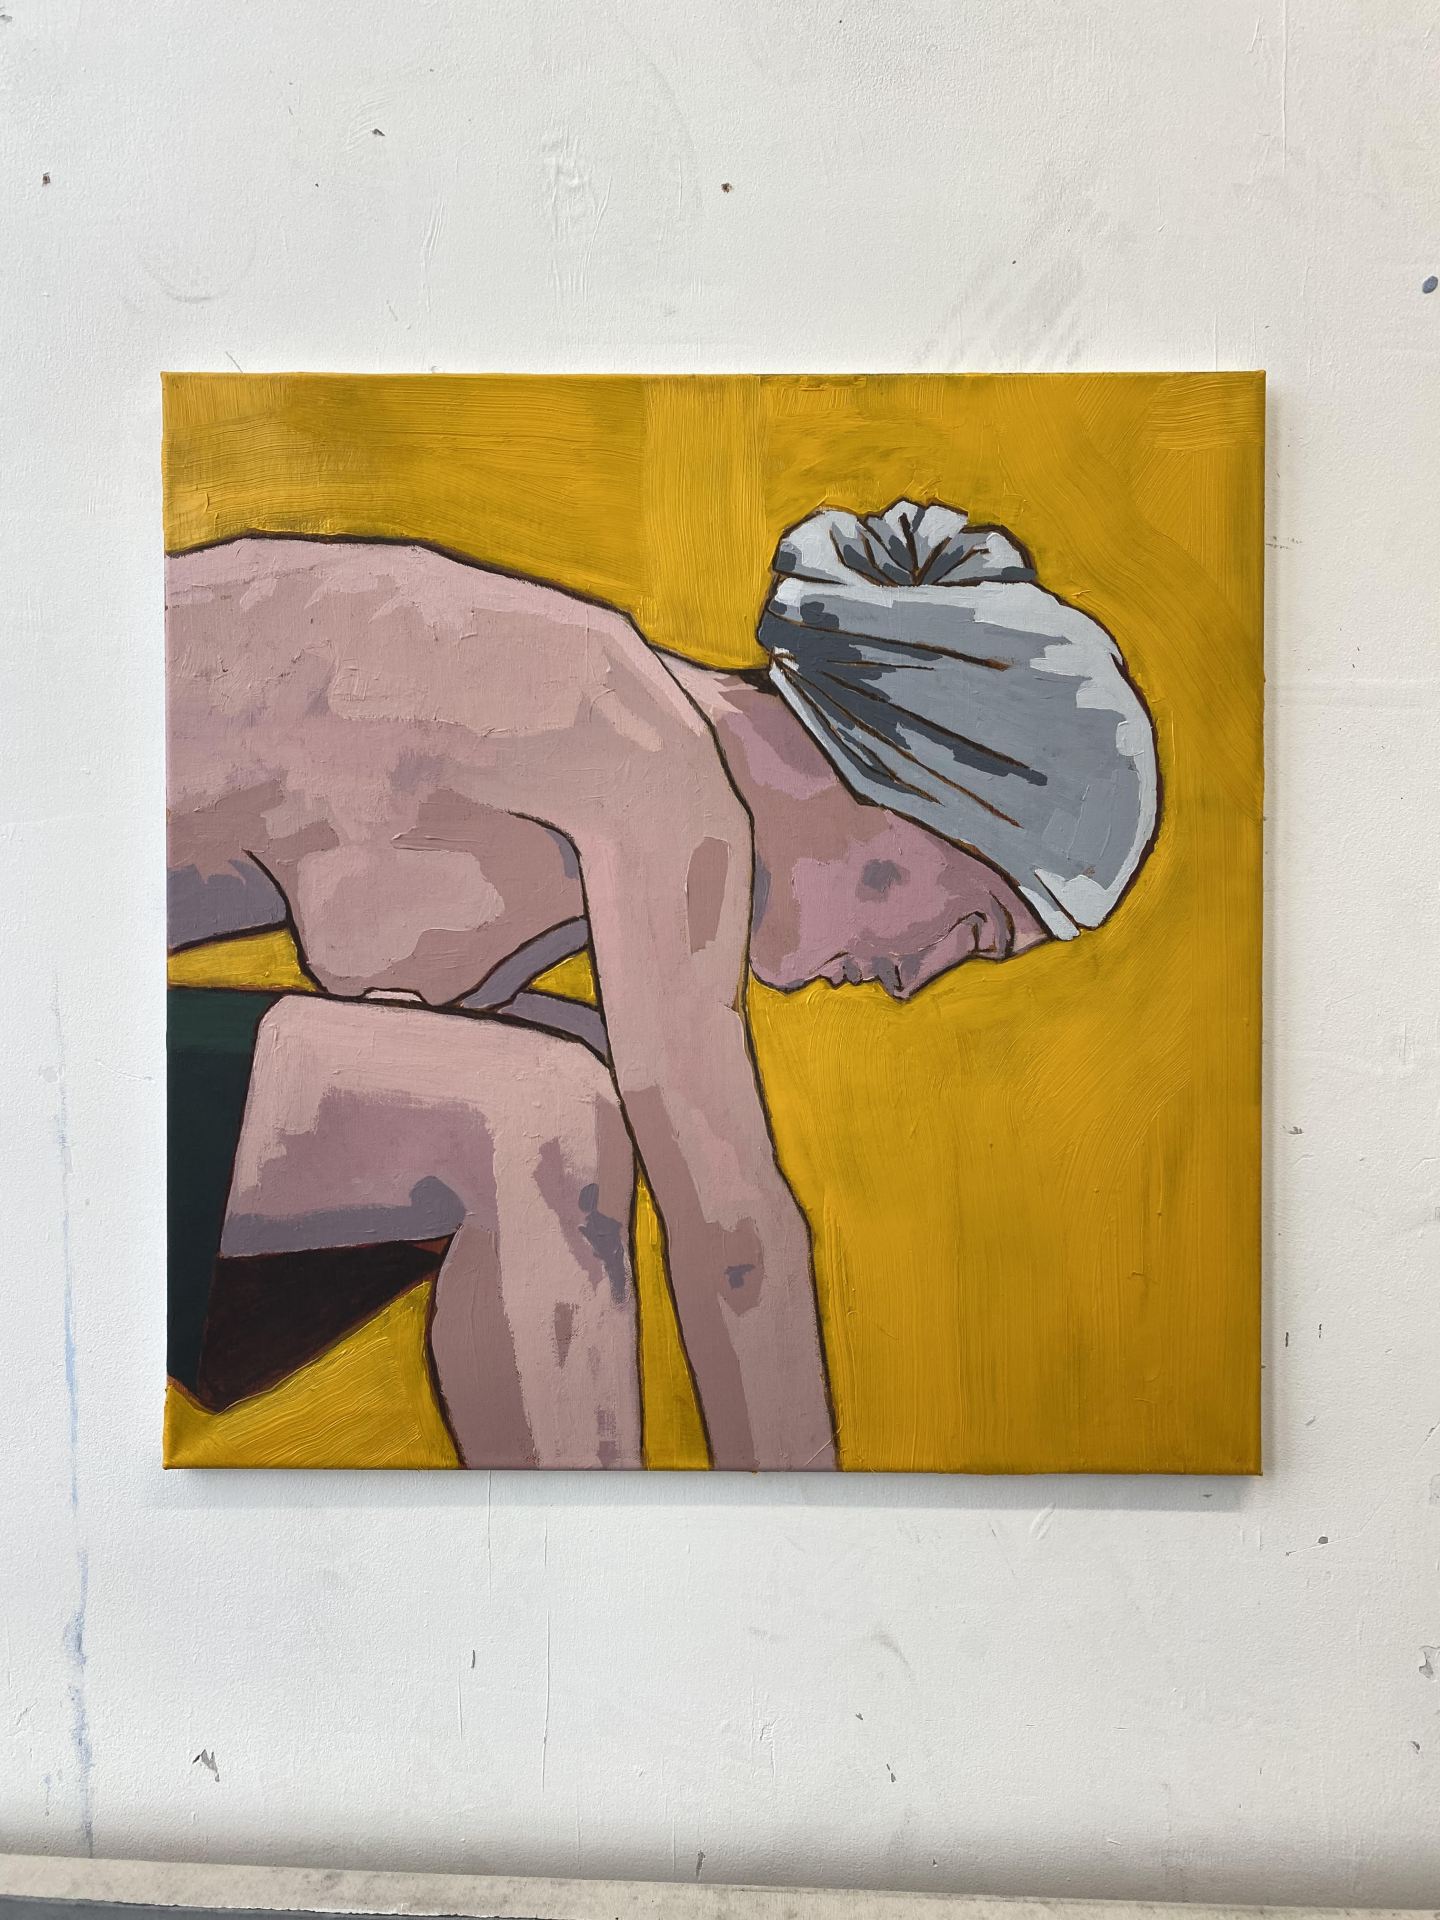 A painting of a person gazing downwards on a yellow canvas.